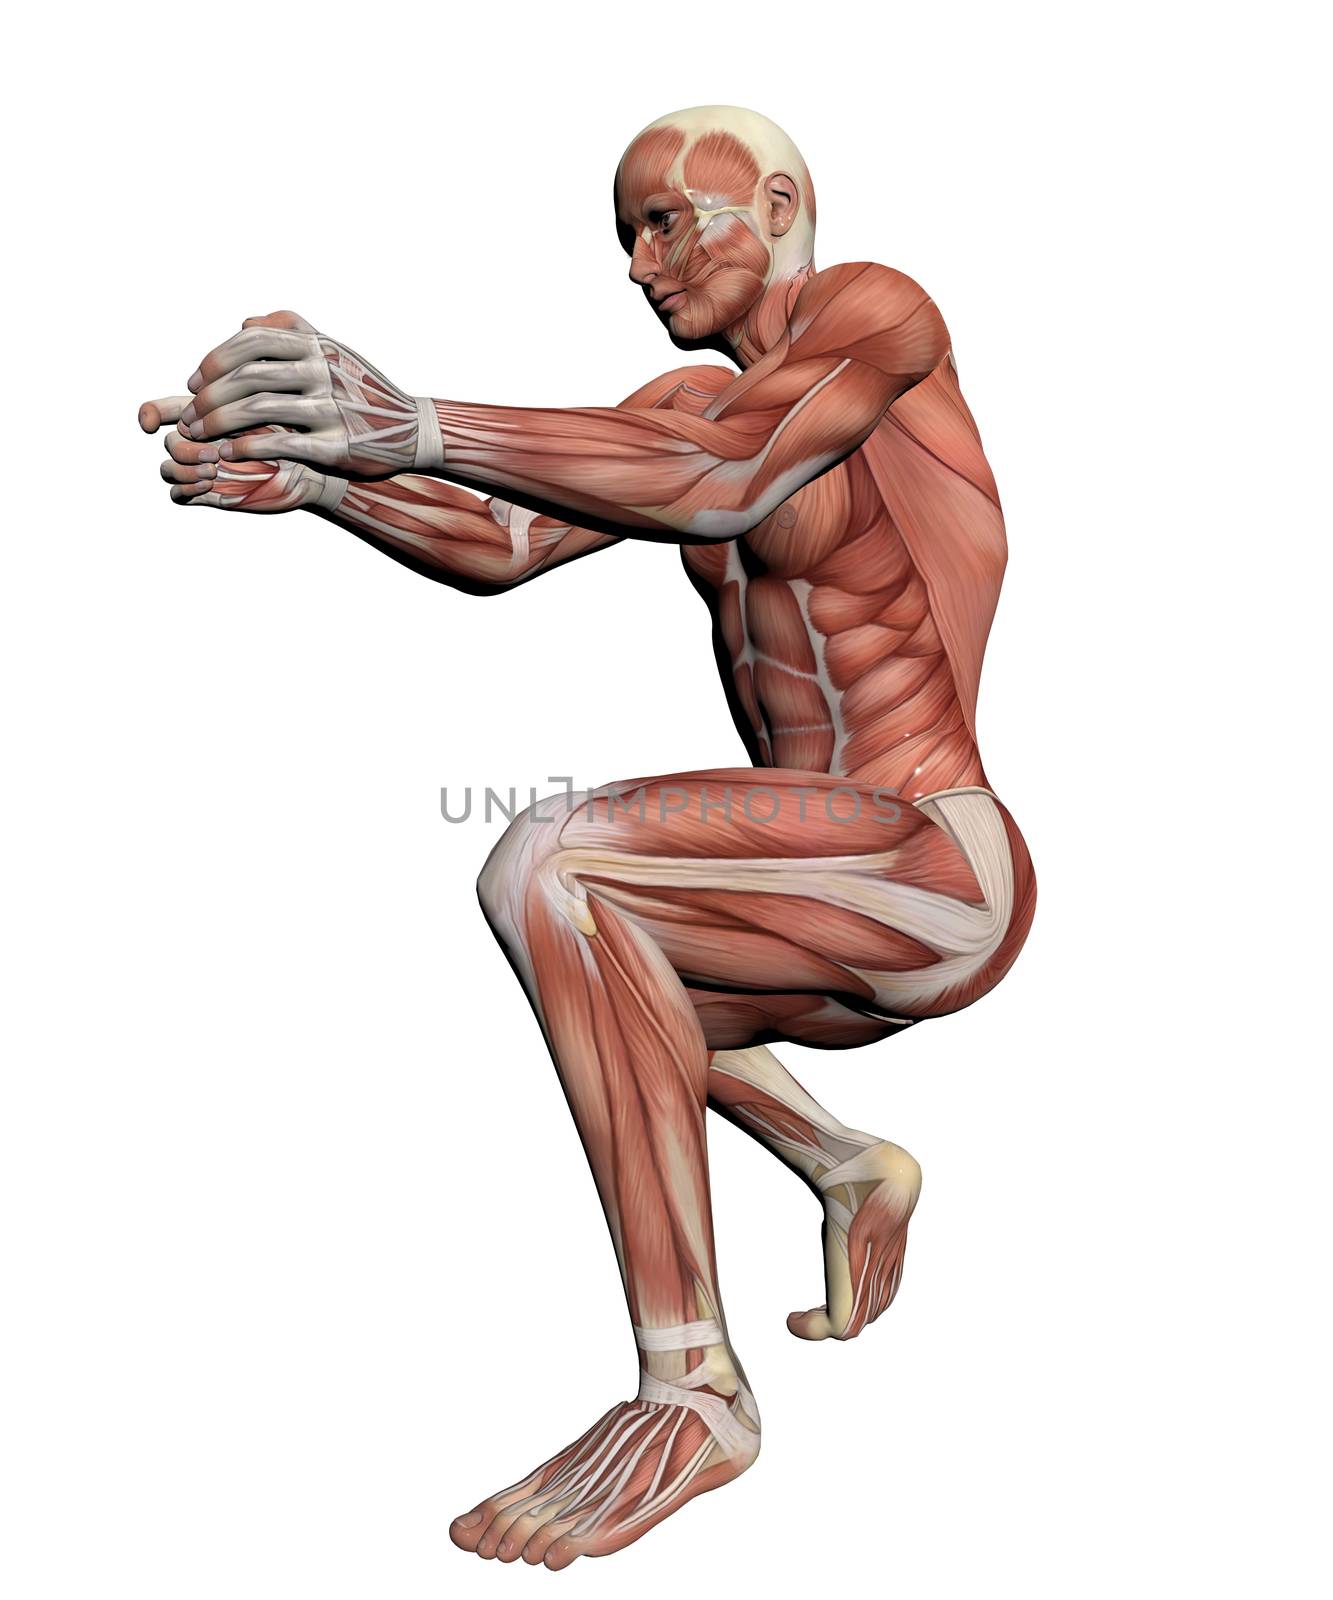 Human Anatomy - Female Muscles made in 3d software